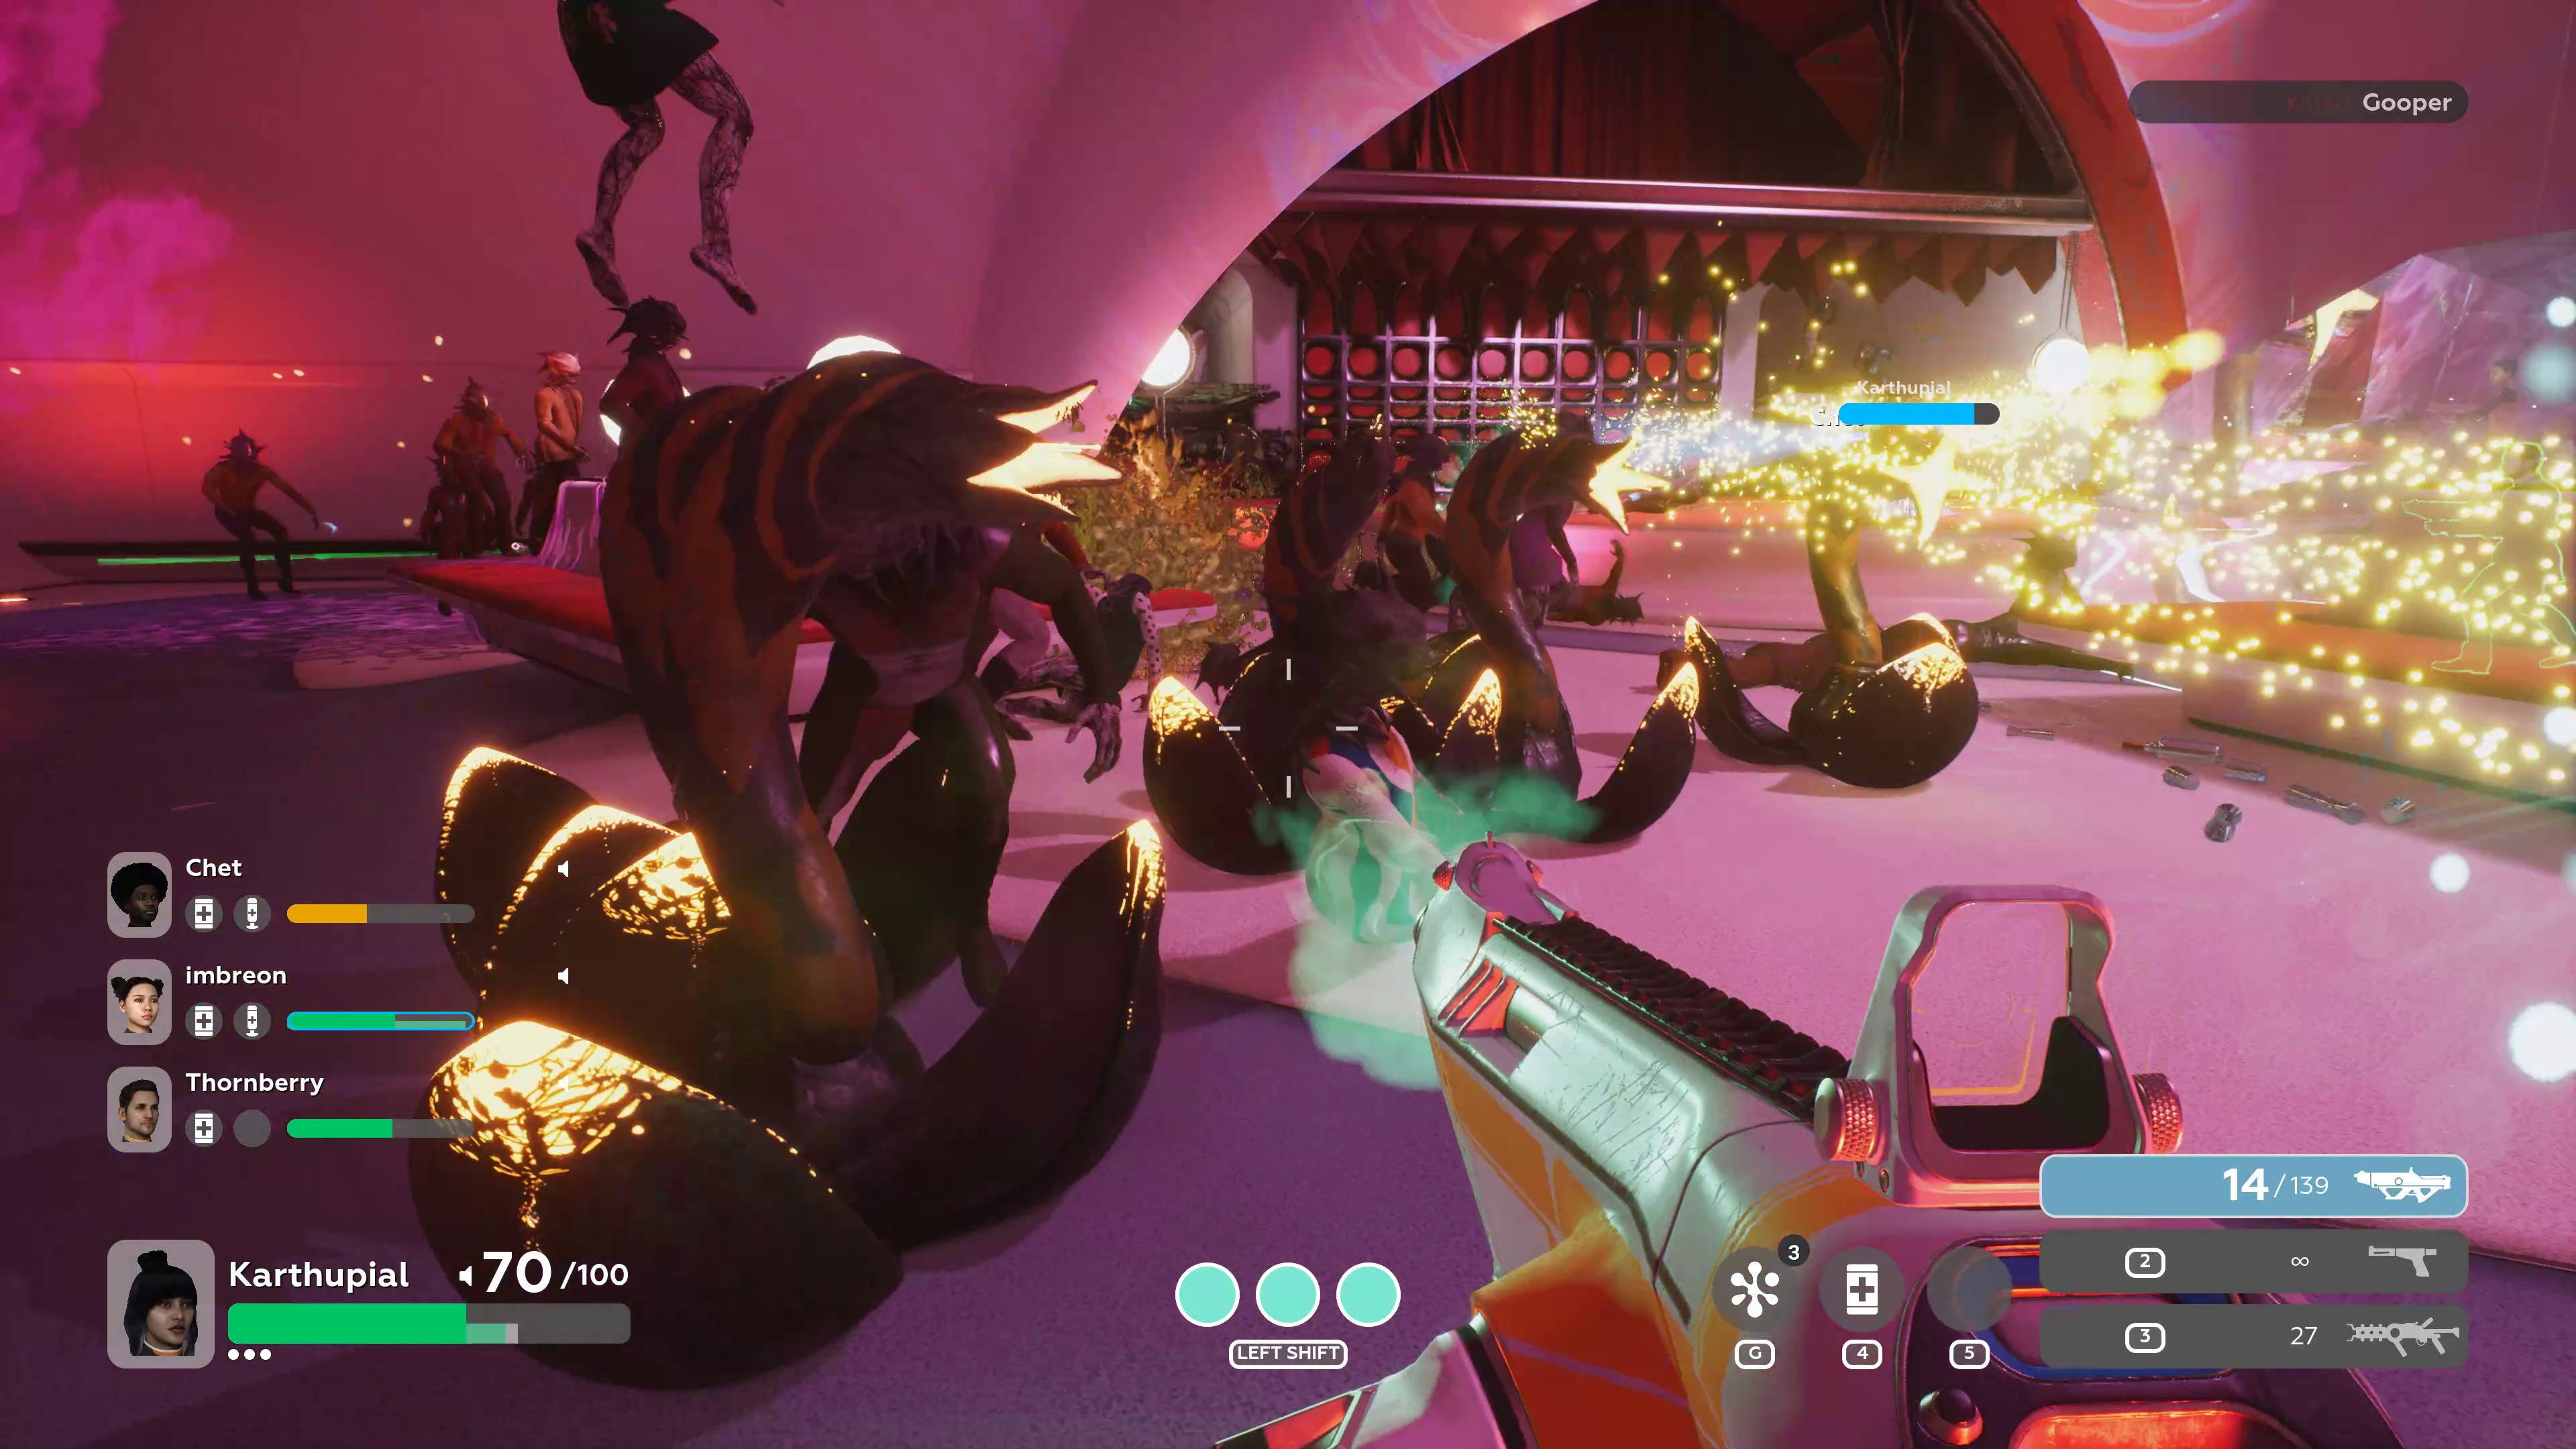 Aliens flock to a disco fight in The Anacrusis